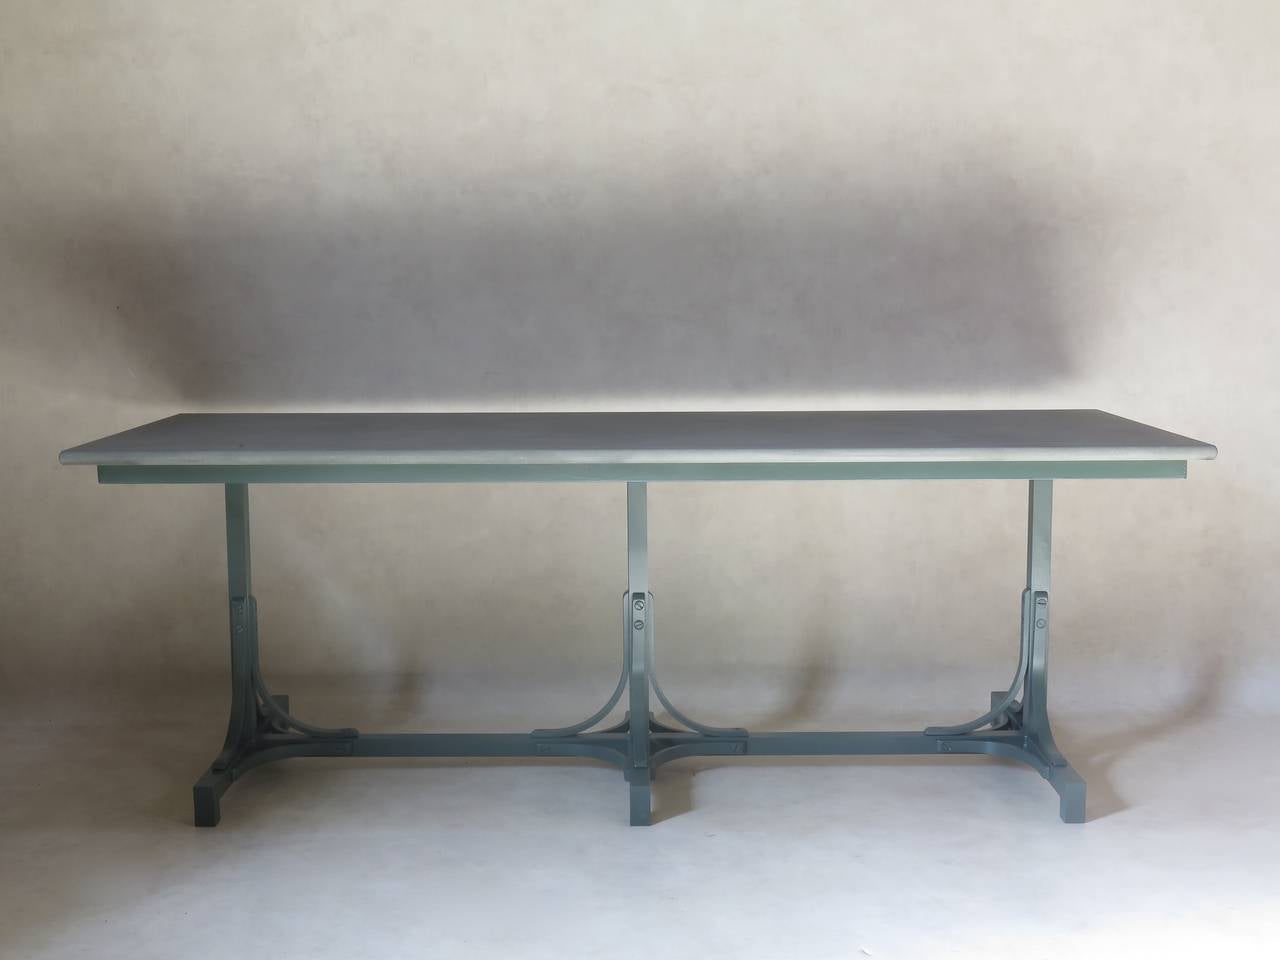 Chic painted iron table with a matte slate grey/green stone top with rounded edges. Nice quality; heavy and well-made.